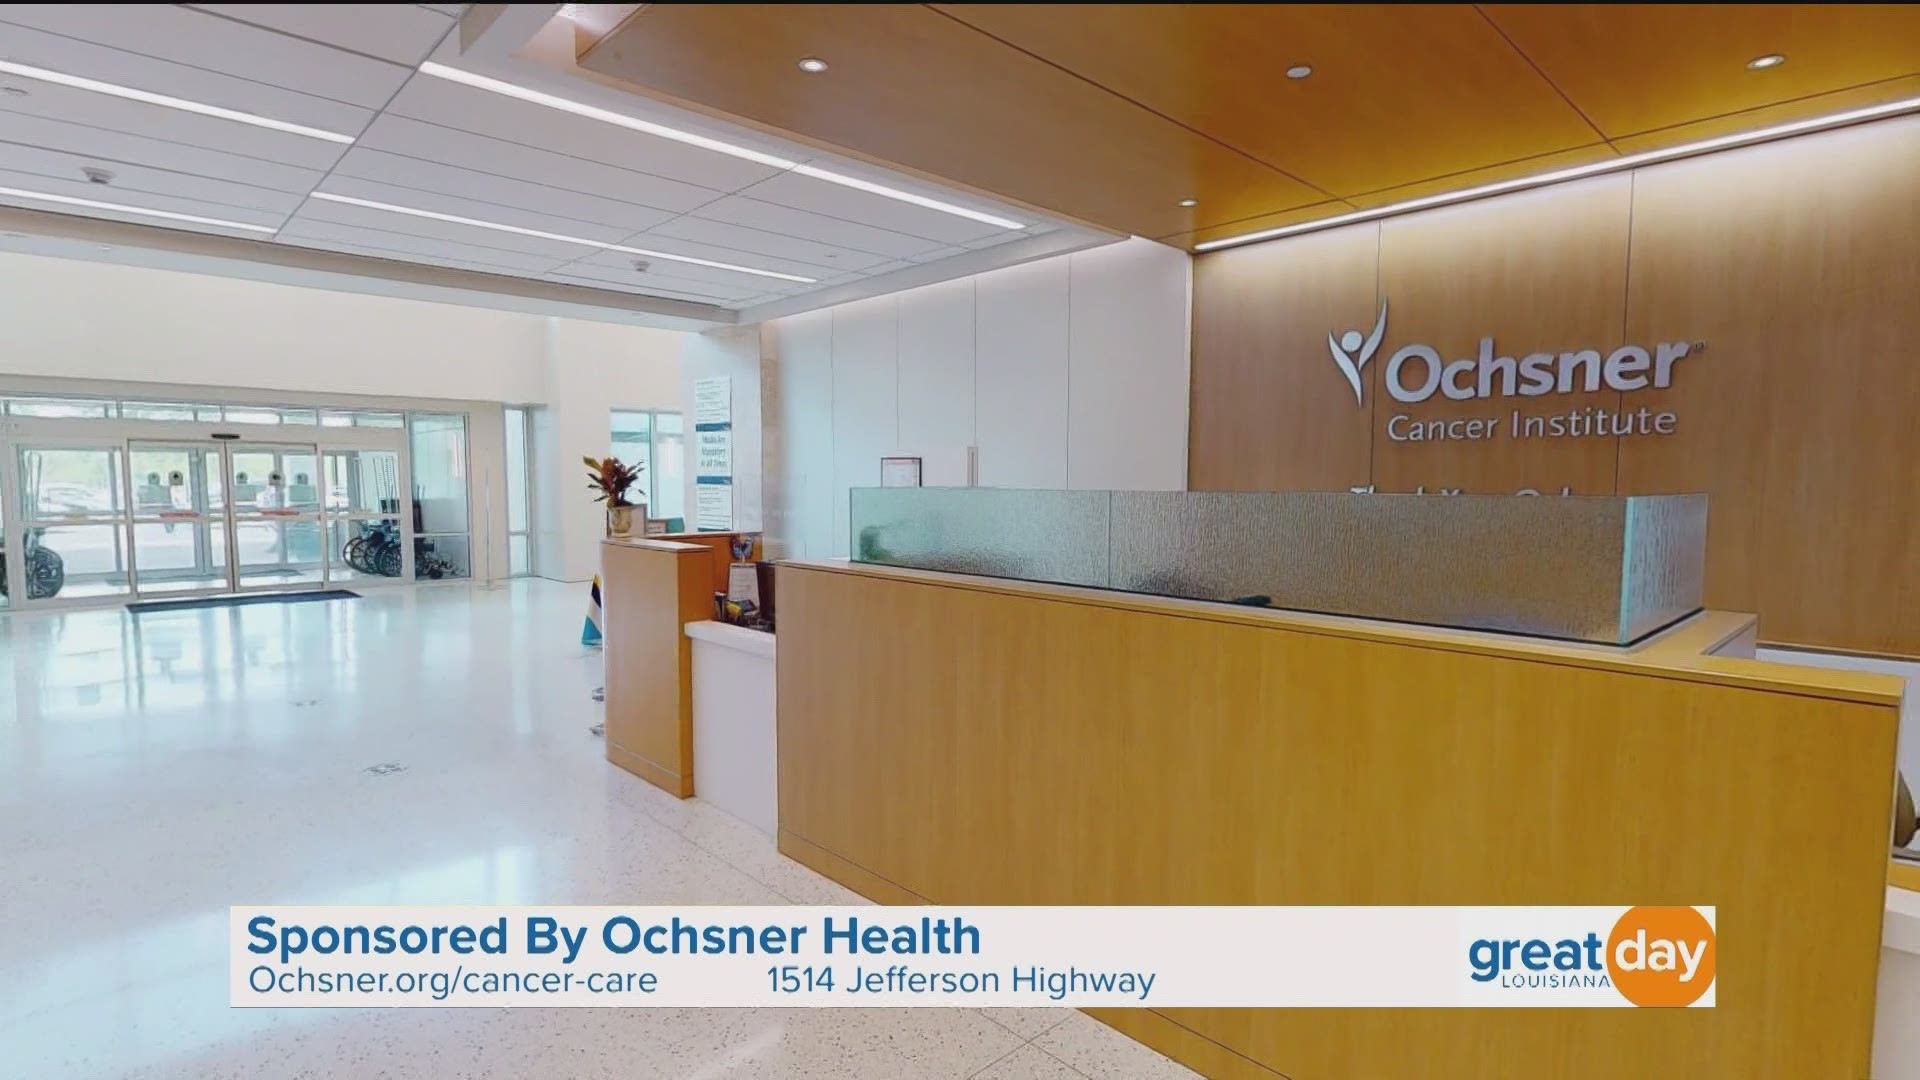 The newly expanded Gayle & Tom Benson Cancer Center at Ochsner Medical Center is now open and treating patients. For more information, visit Ochsner.org/cancer-care